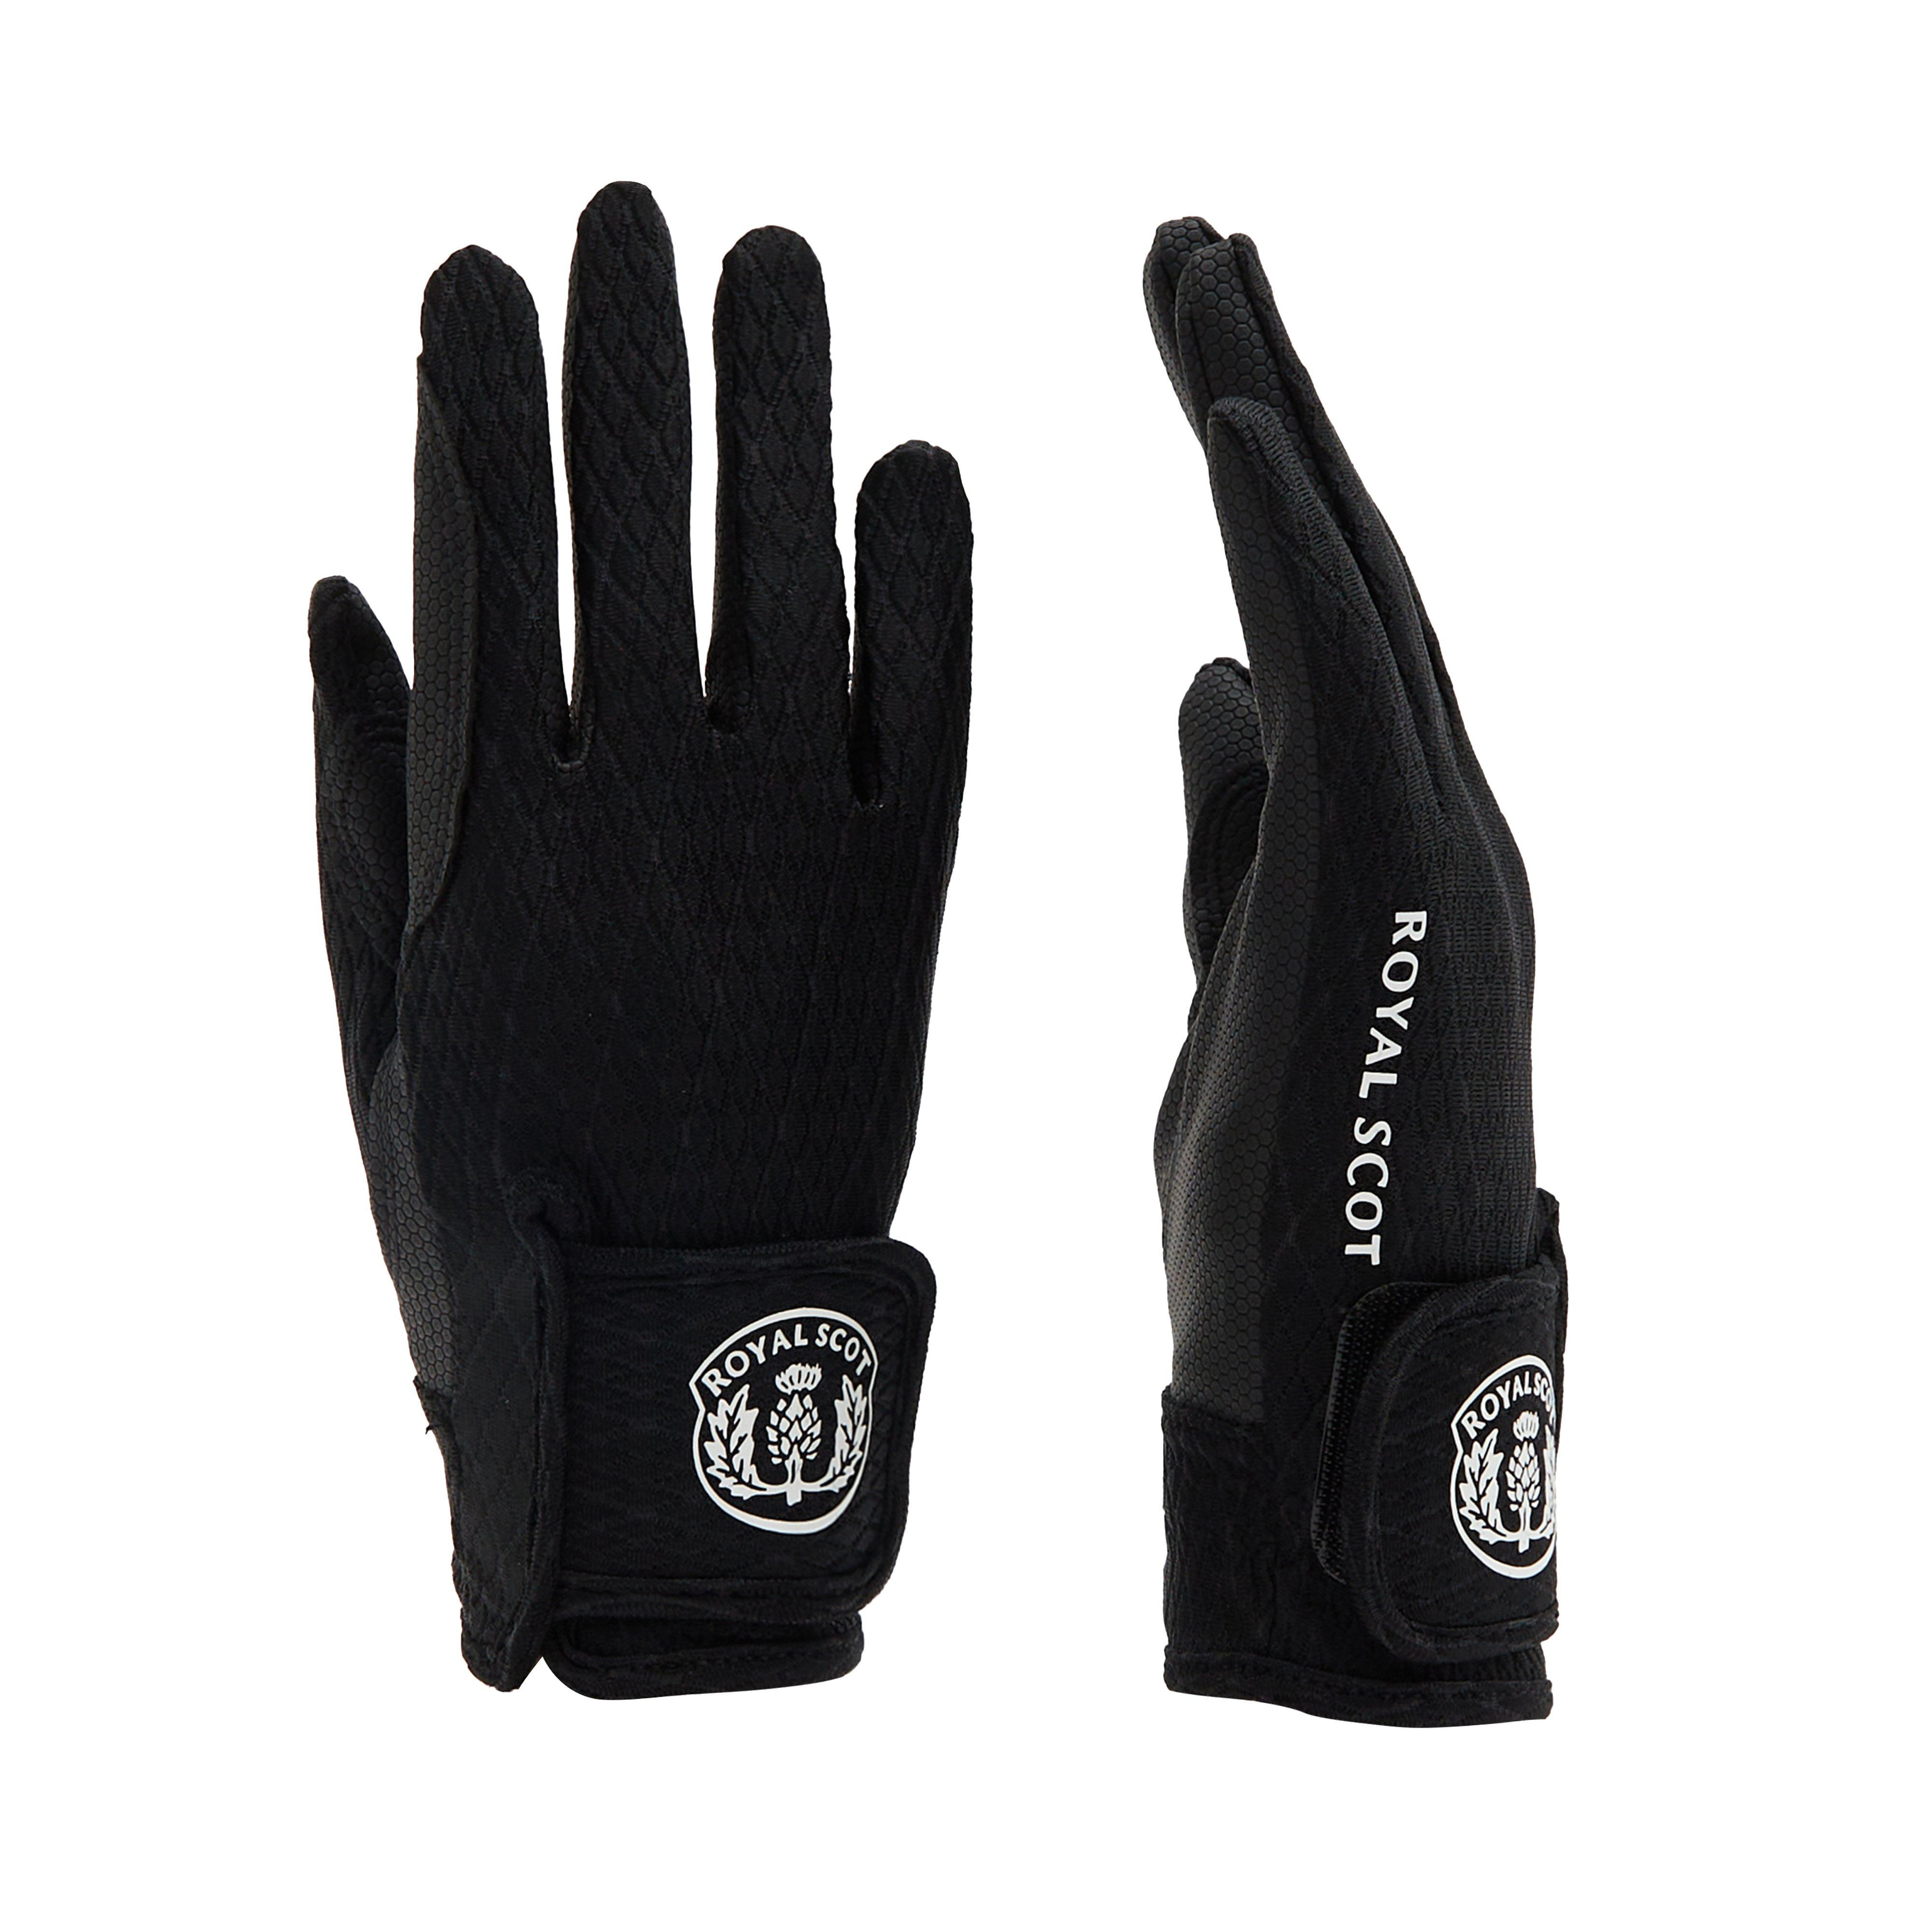 Adults Silicone Grip Riding Gloves Black